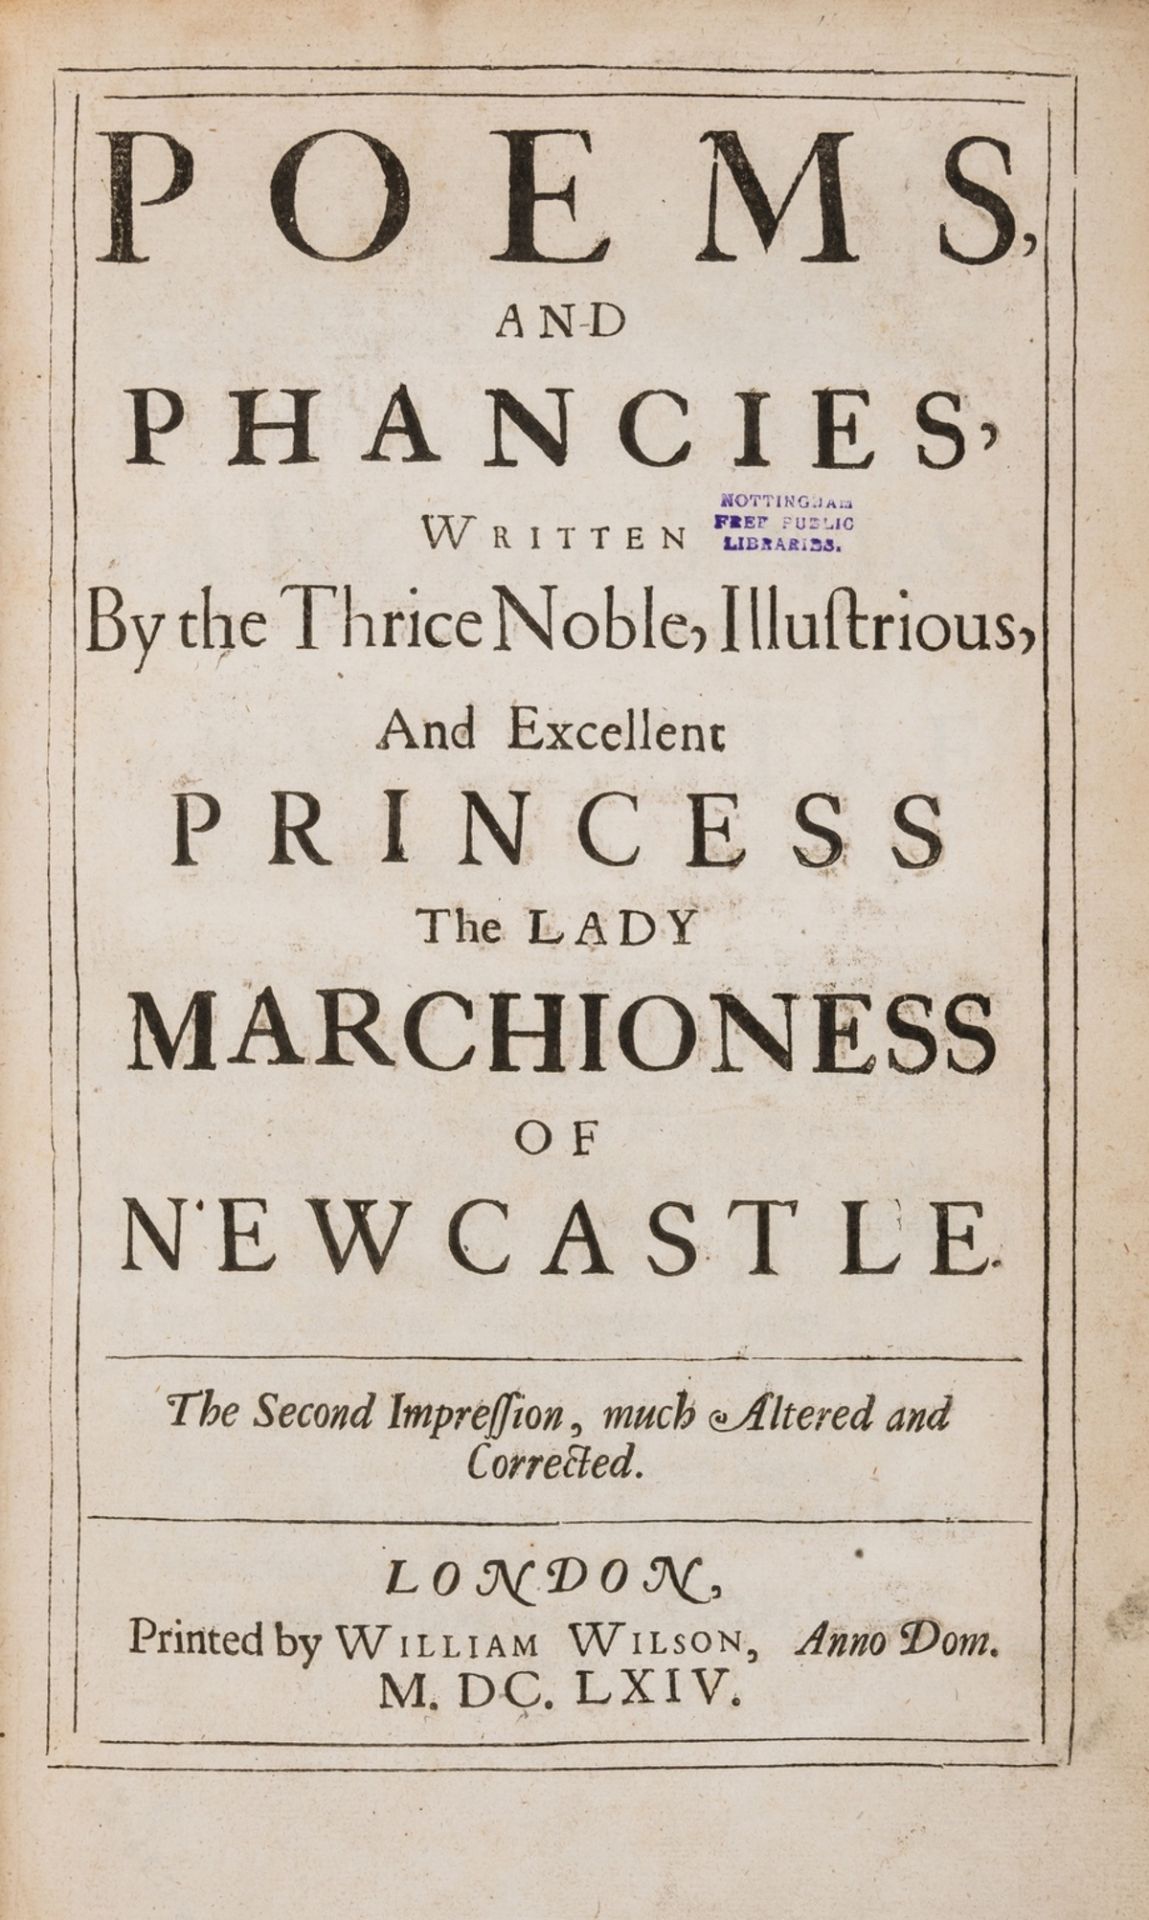 Cavendish (Margaret, Duchess of Newcastle) Poems and Phancies, by William Wilson, 1664.